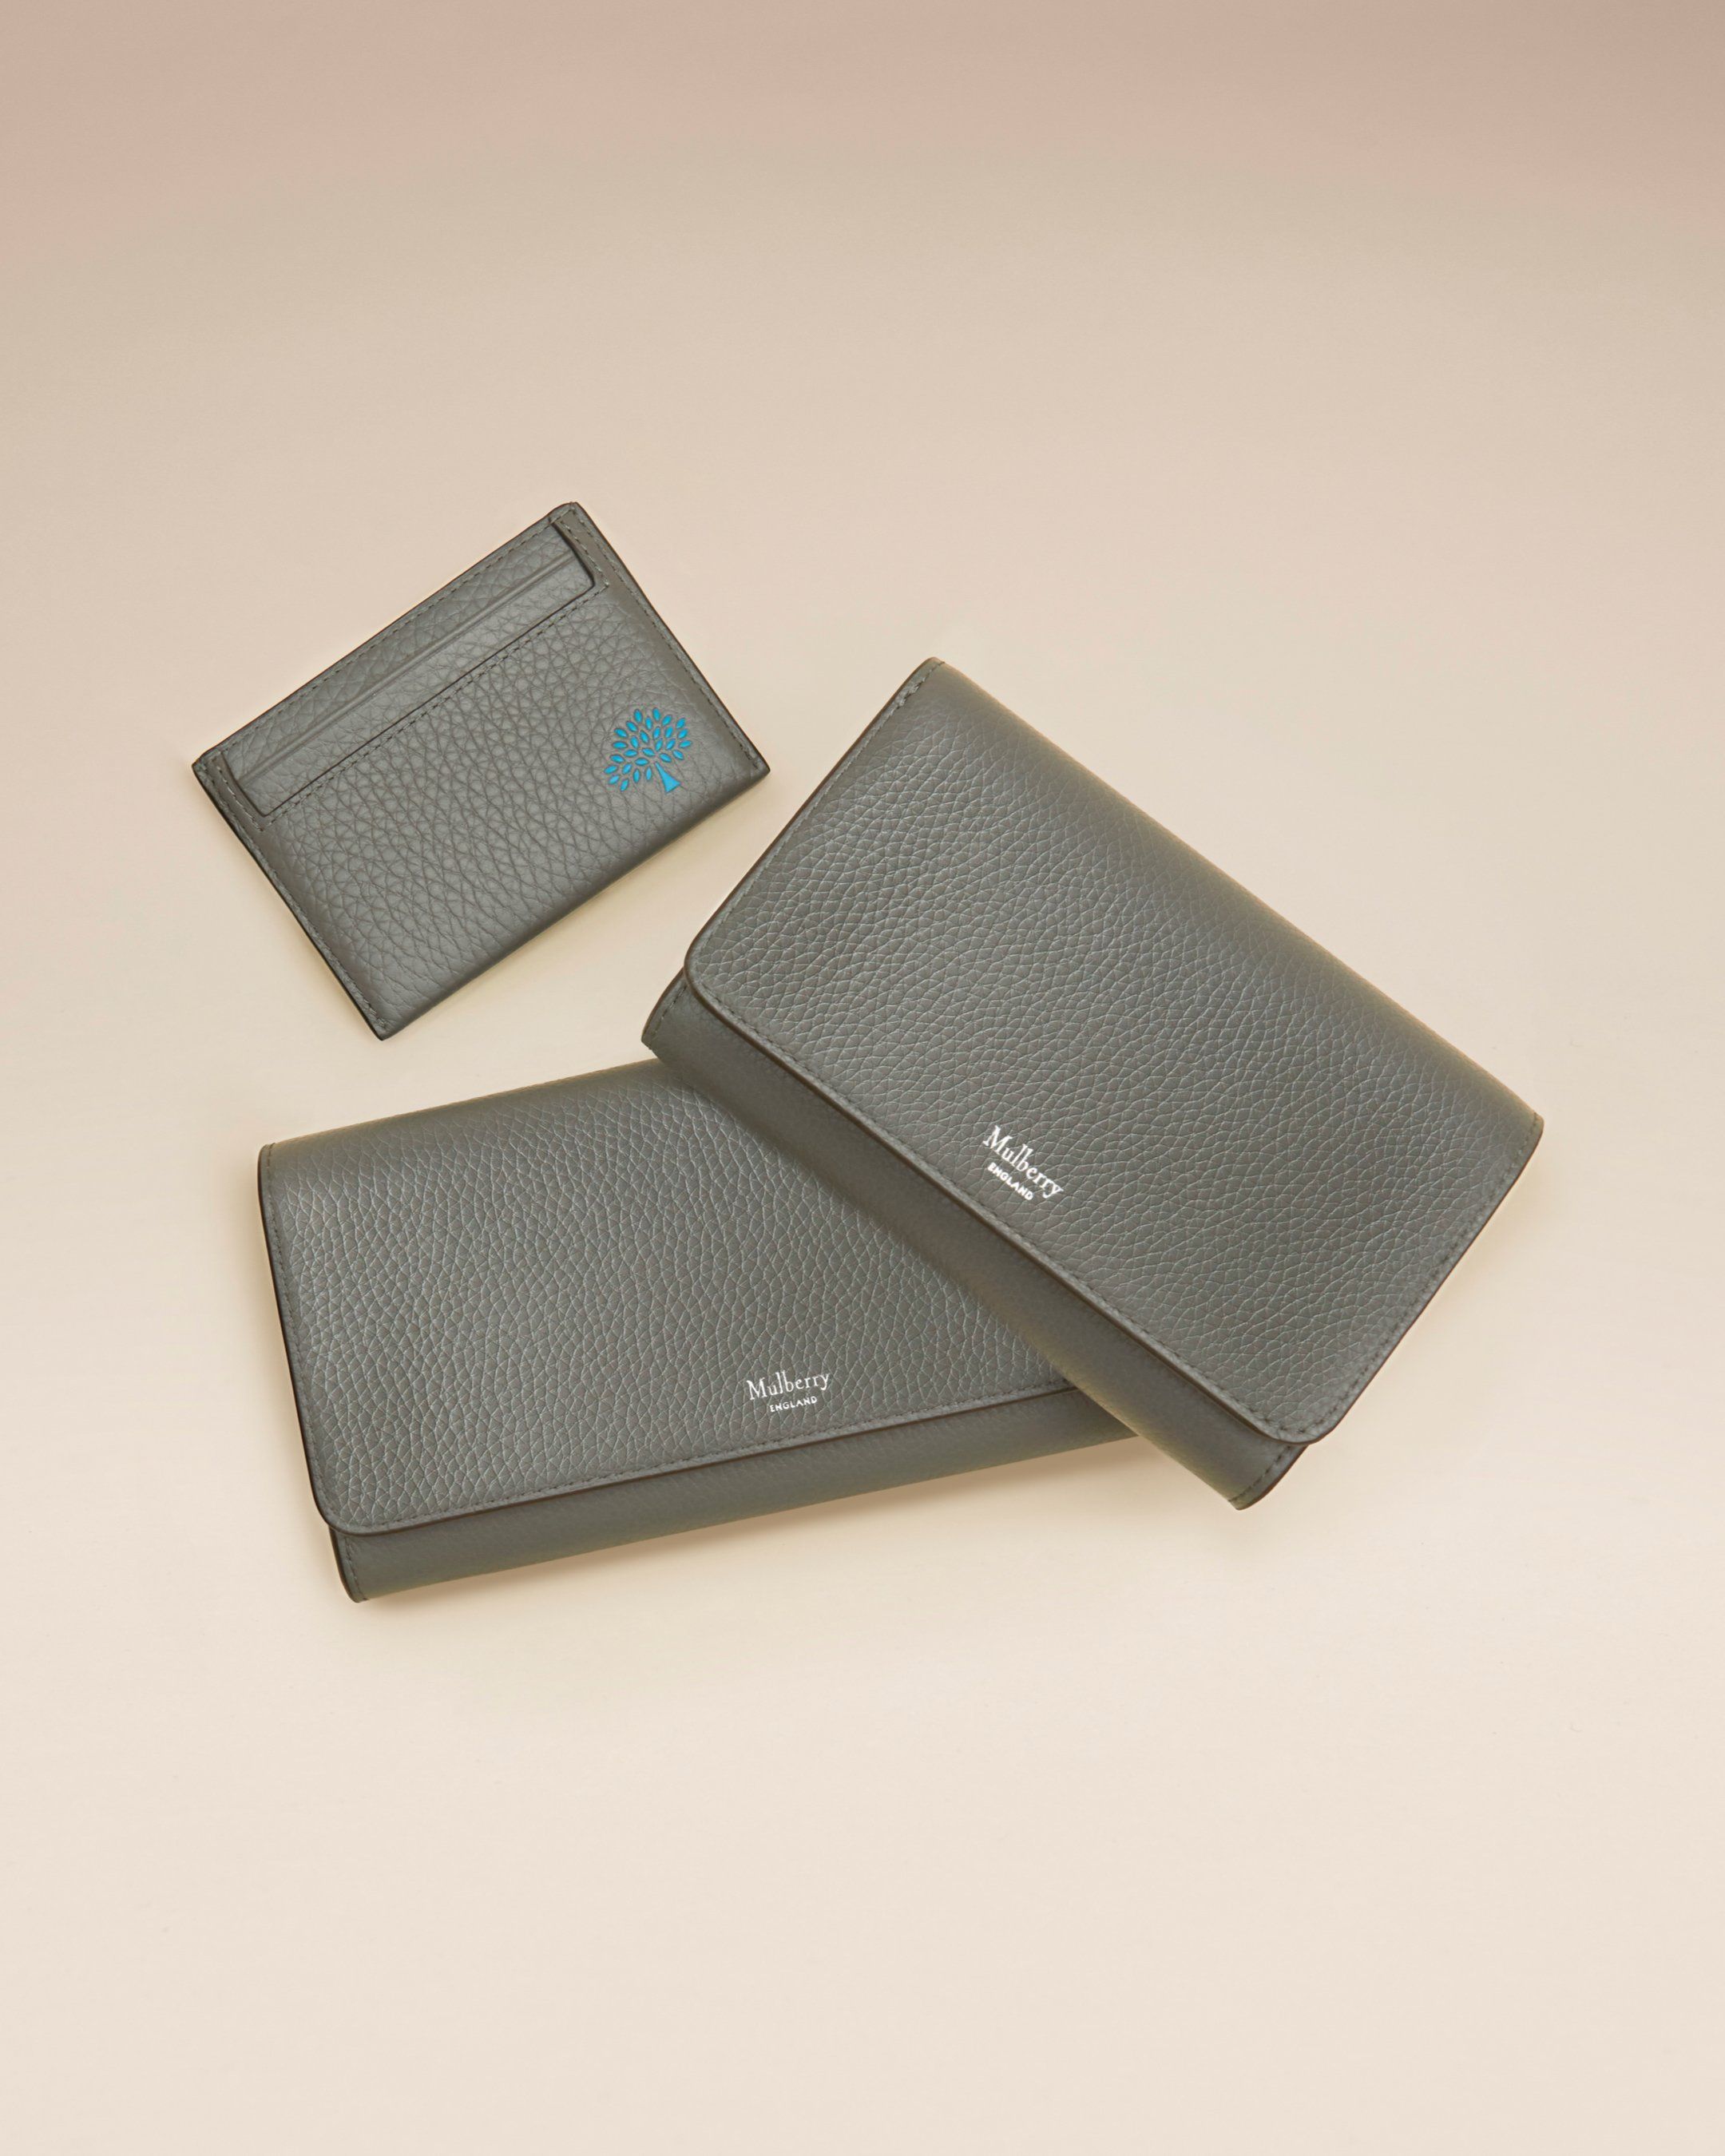 Trio of Mulberry credit card slip, continental wallets in Charcoal